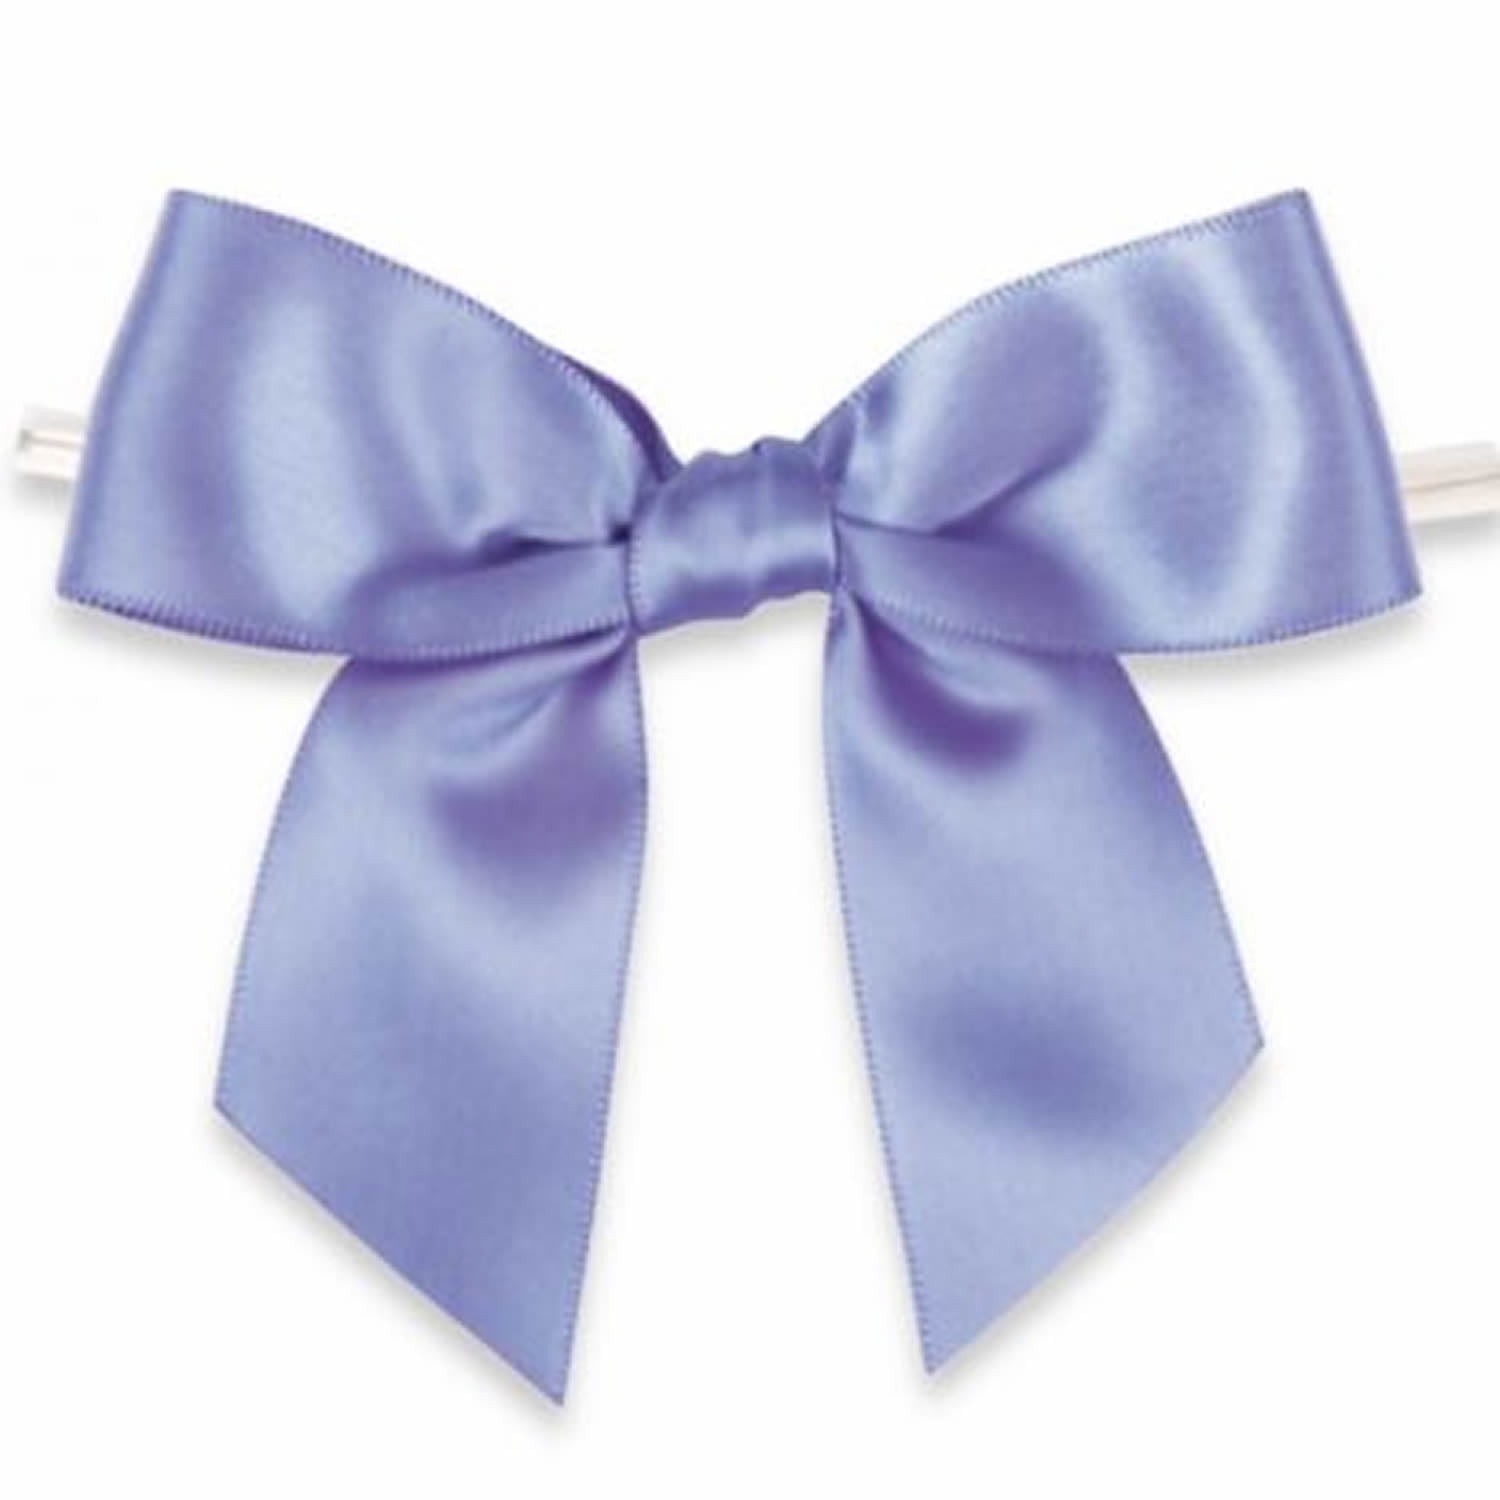 4-1/2 x 2-3/4” Pre-Tied Bow – Self-Adhesive 1-1/2” Blue